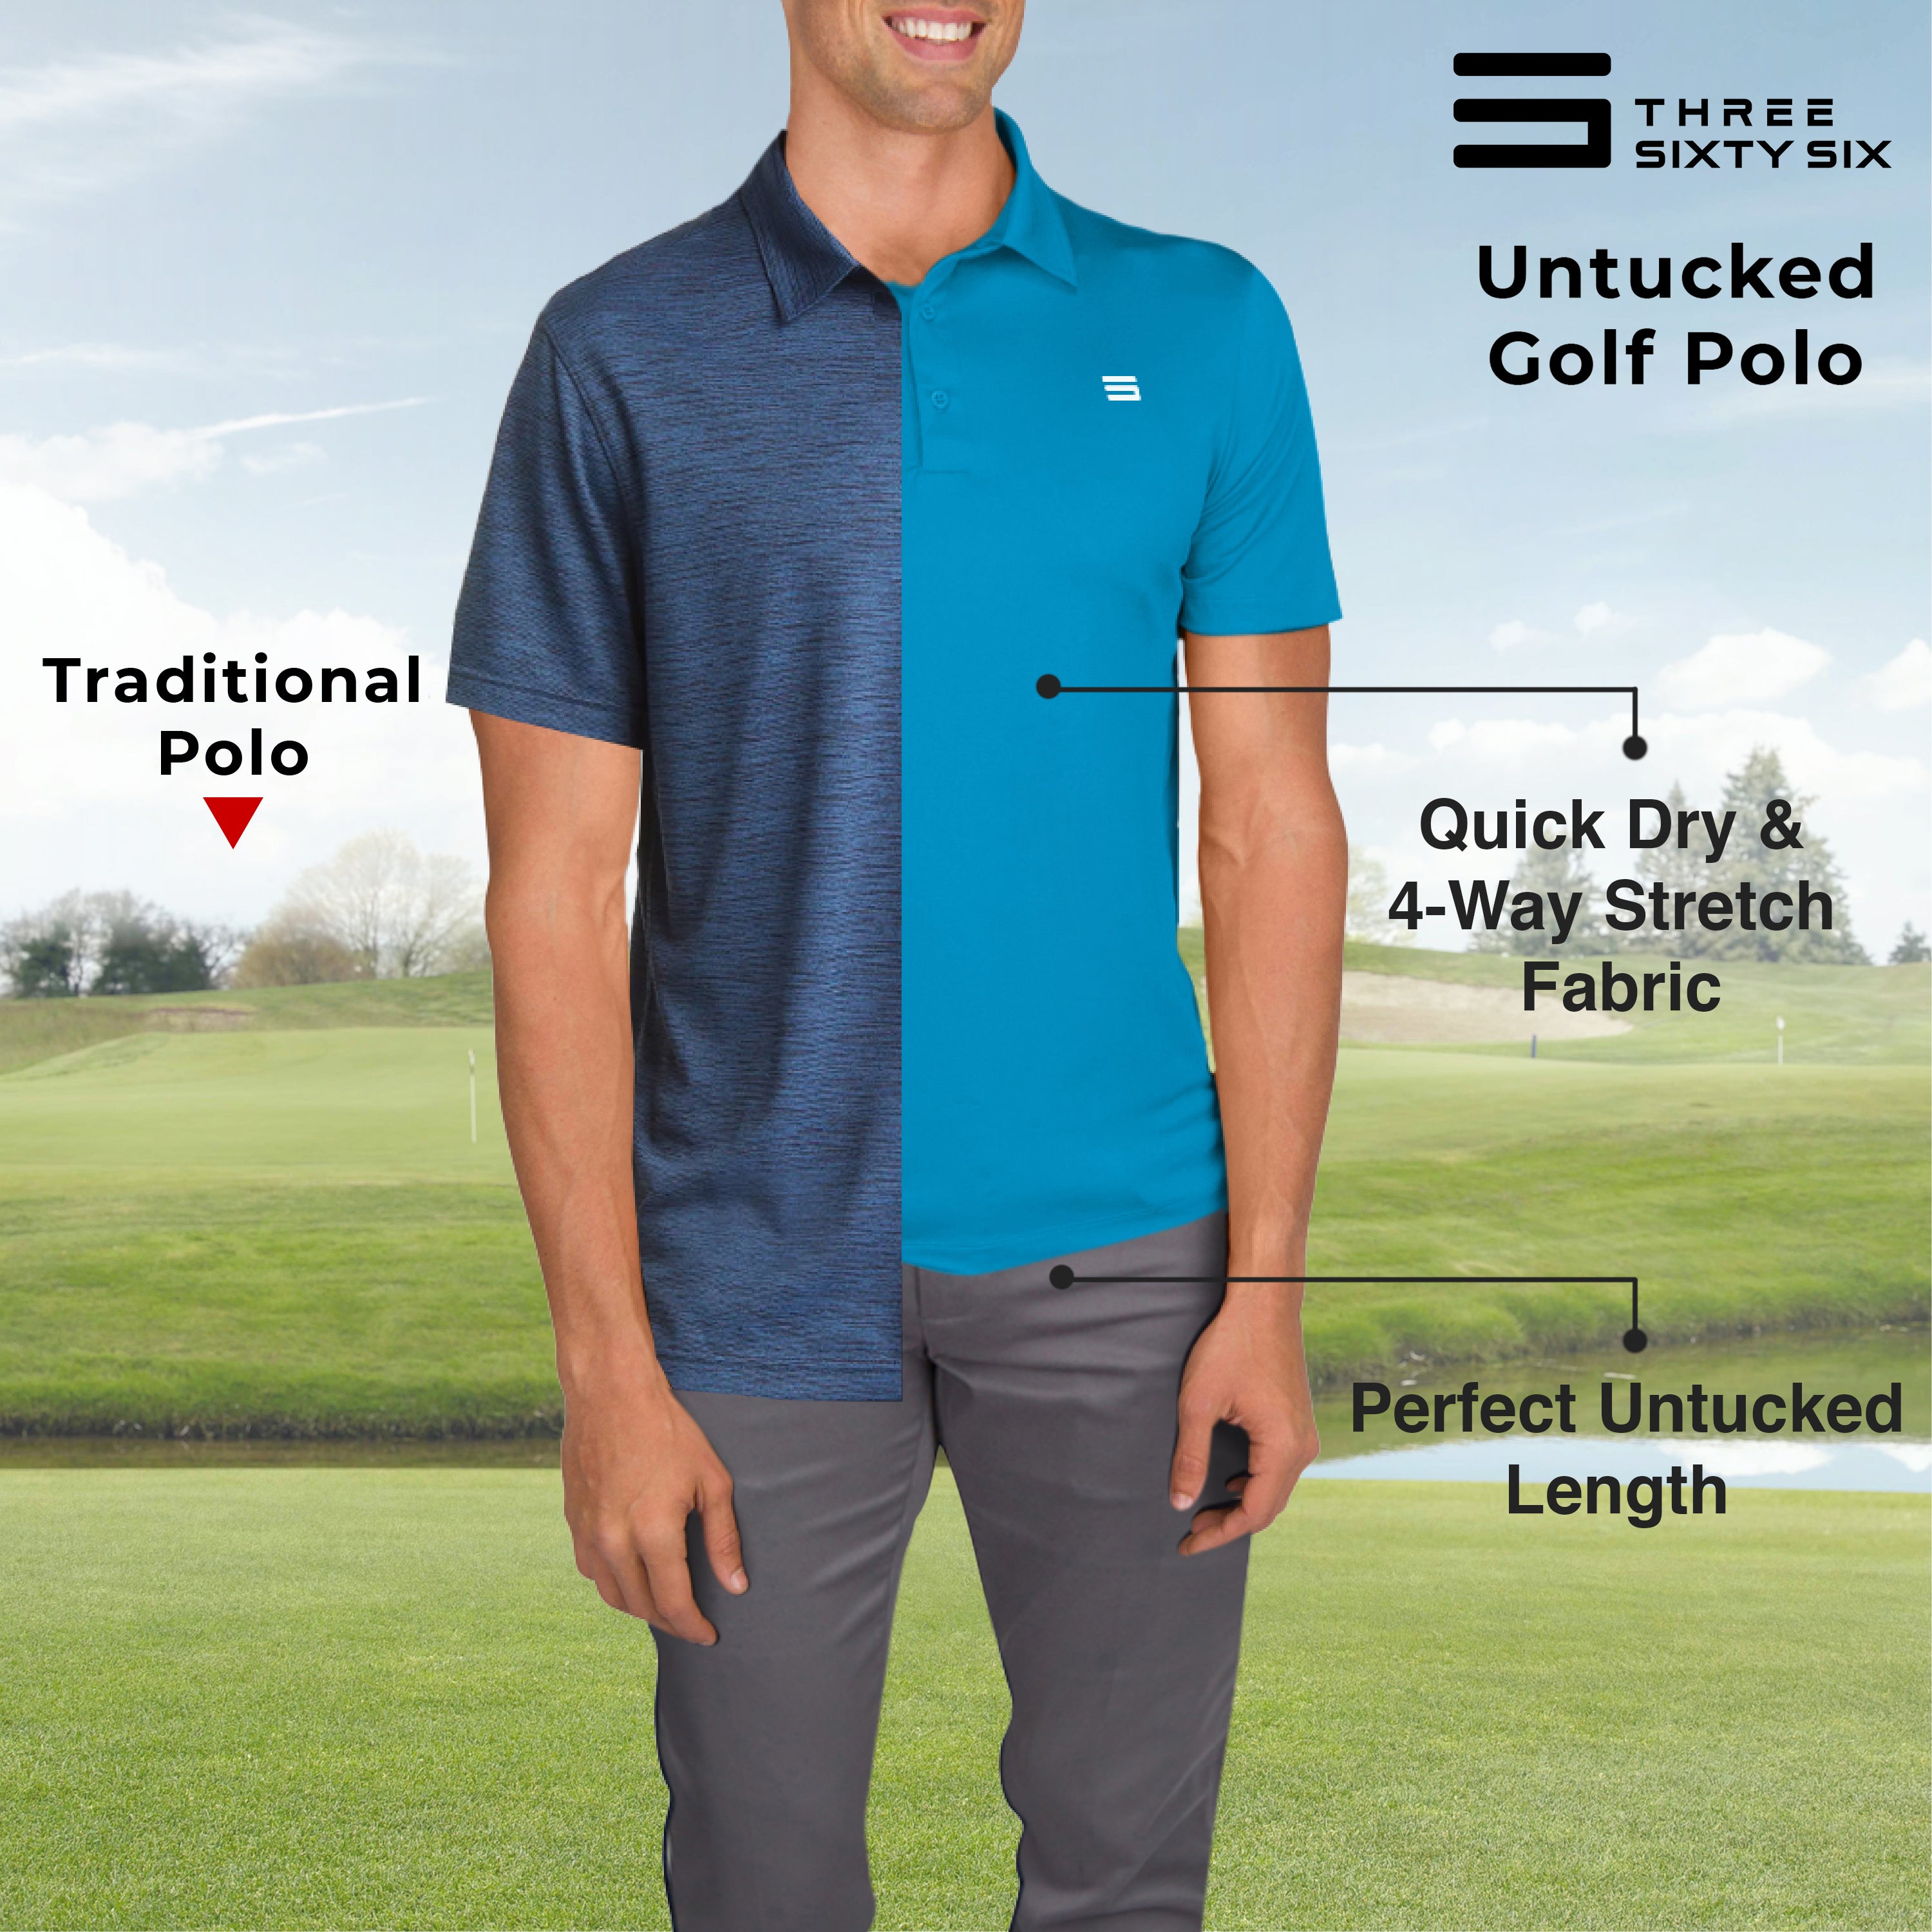 Extreme Deal - Men's Untucked Golf Polo - The Perfect Length